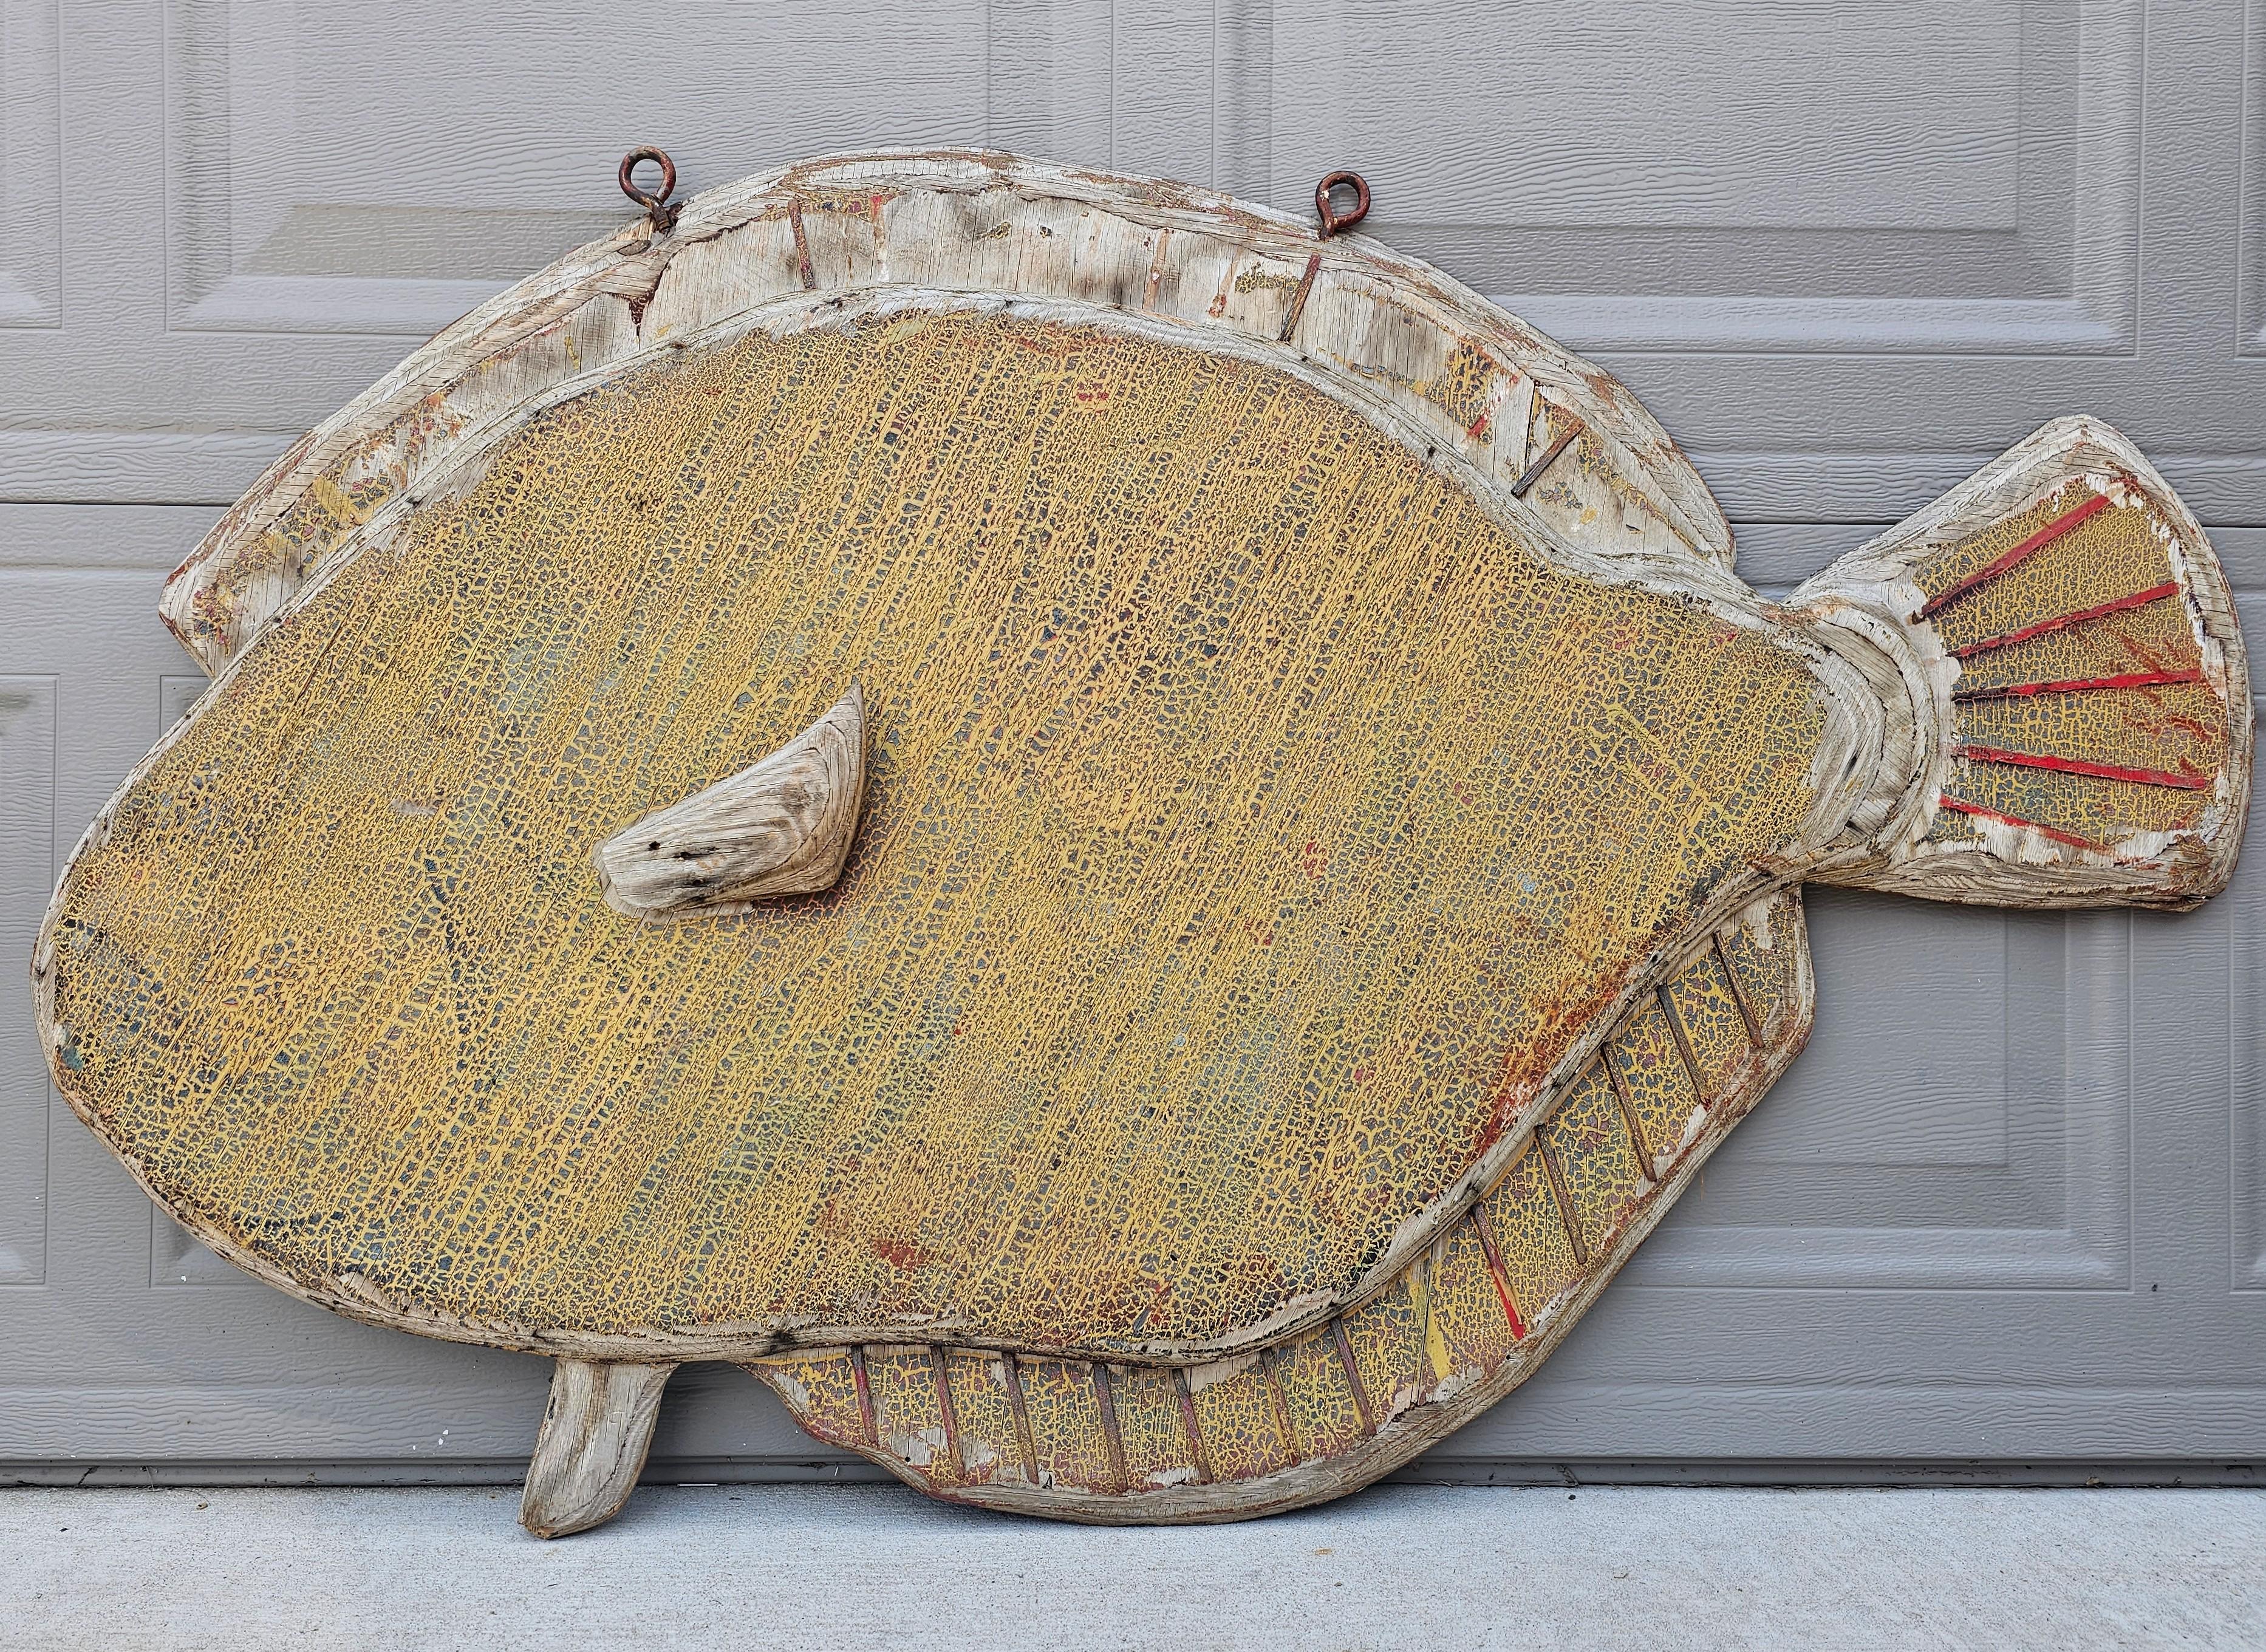 A most charming and one-of-a-kind antique North Carolina bait shop trade sign with beautifully weathered patina!

A wonderful example of American folk art, early 20th century, primitive hand-crafted construction, sculptural wooden form depicting